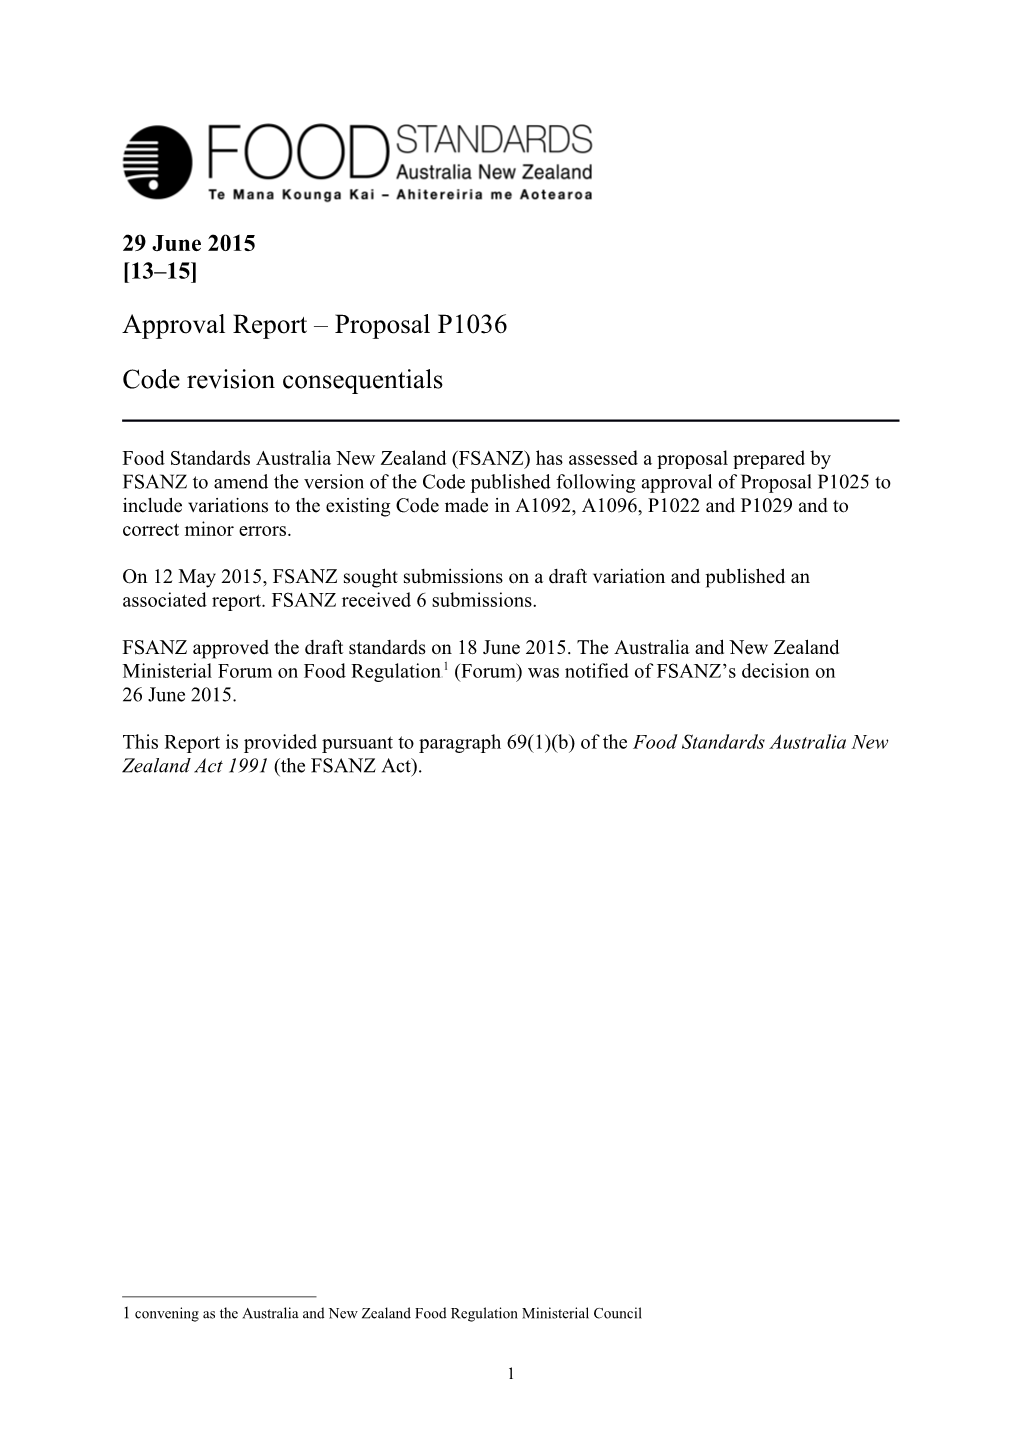 Approval Report Proposalp1036